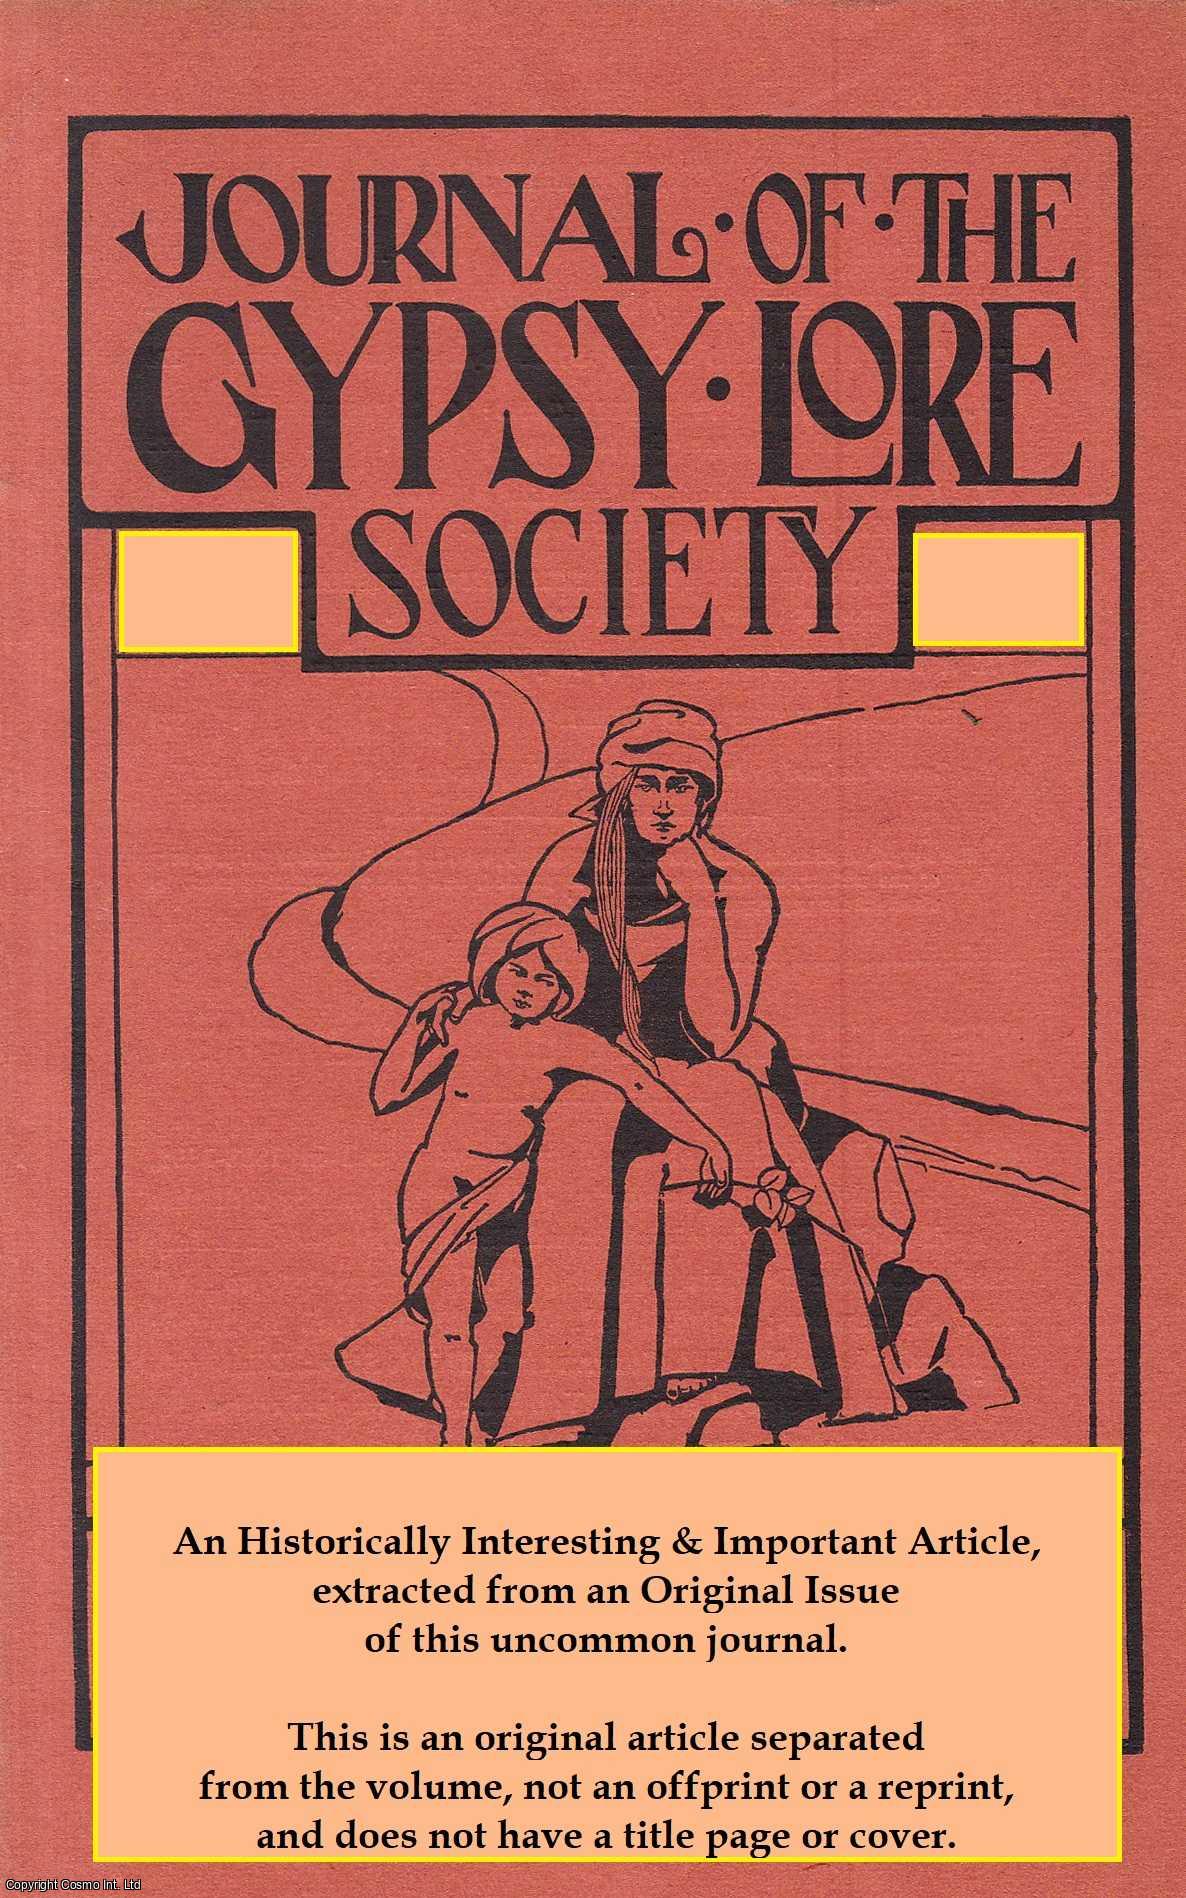 Madame G. L'Huillier - The Artistic Sense of the Gypsy. An uncommon original article from the Journal of the Gypsy Lore Society, 1956.